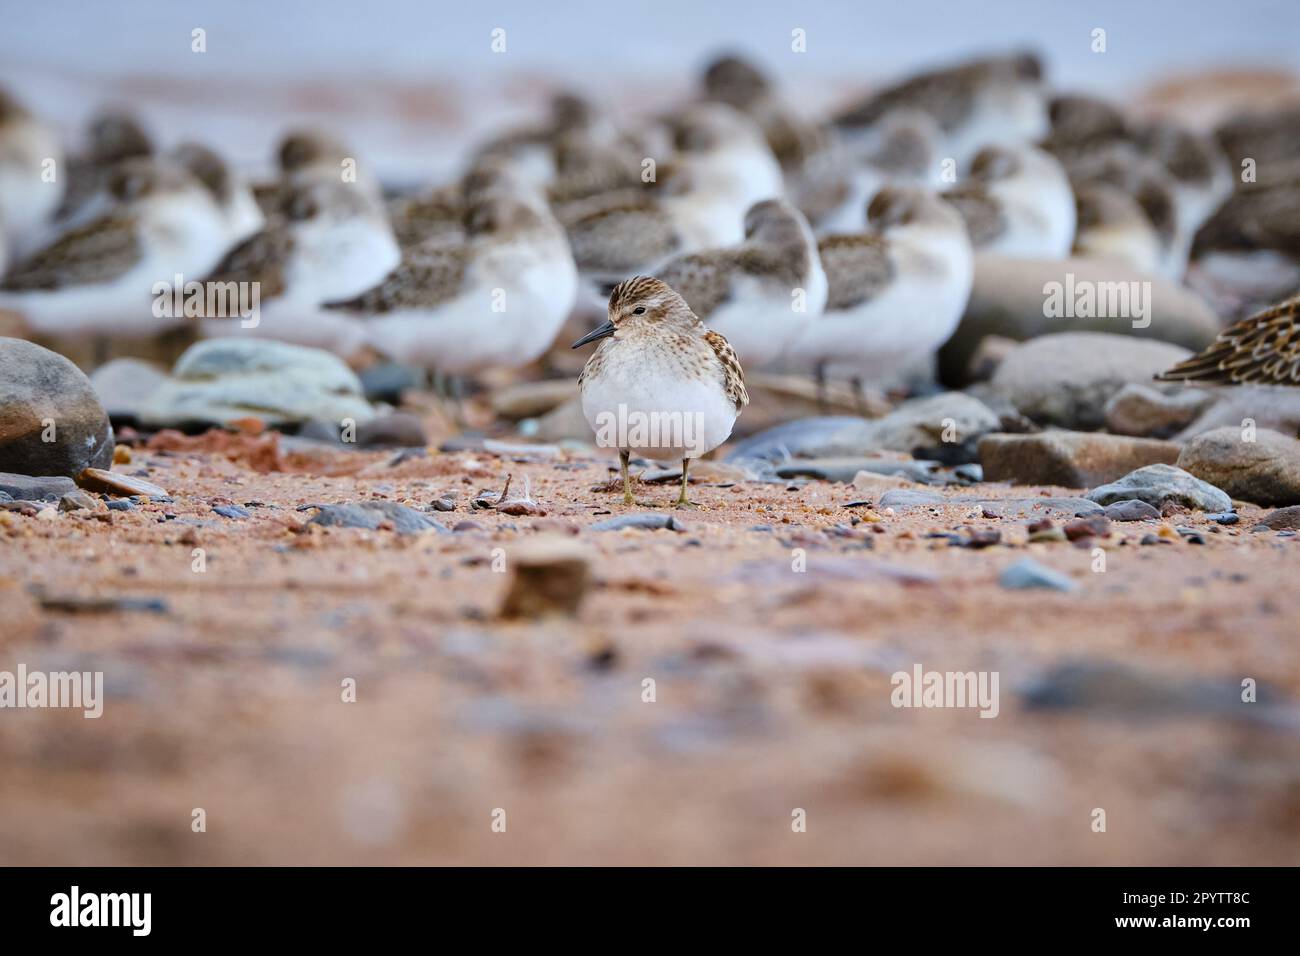 flock of Semipalmated Sandpiper, Calidris pusilla, hundled together on a beach preparing for winter migration south Stock Photo